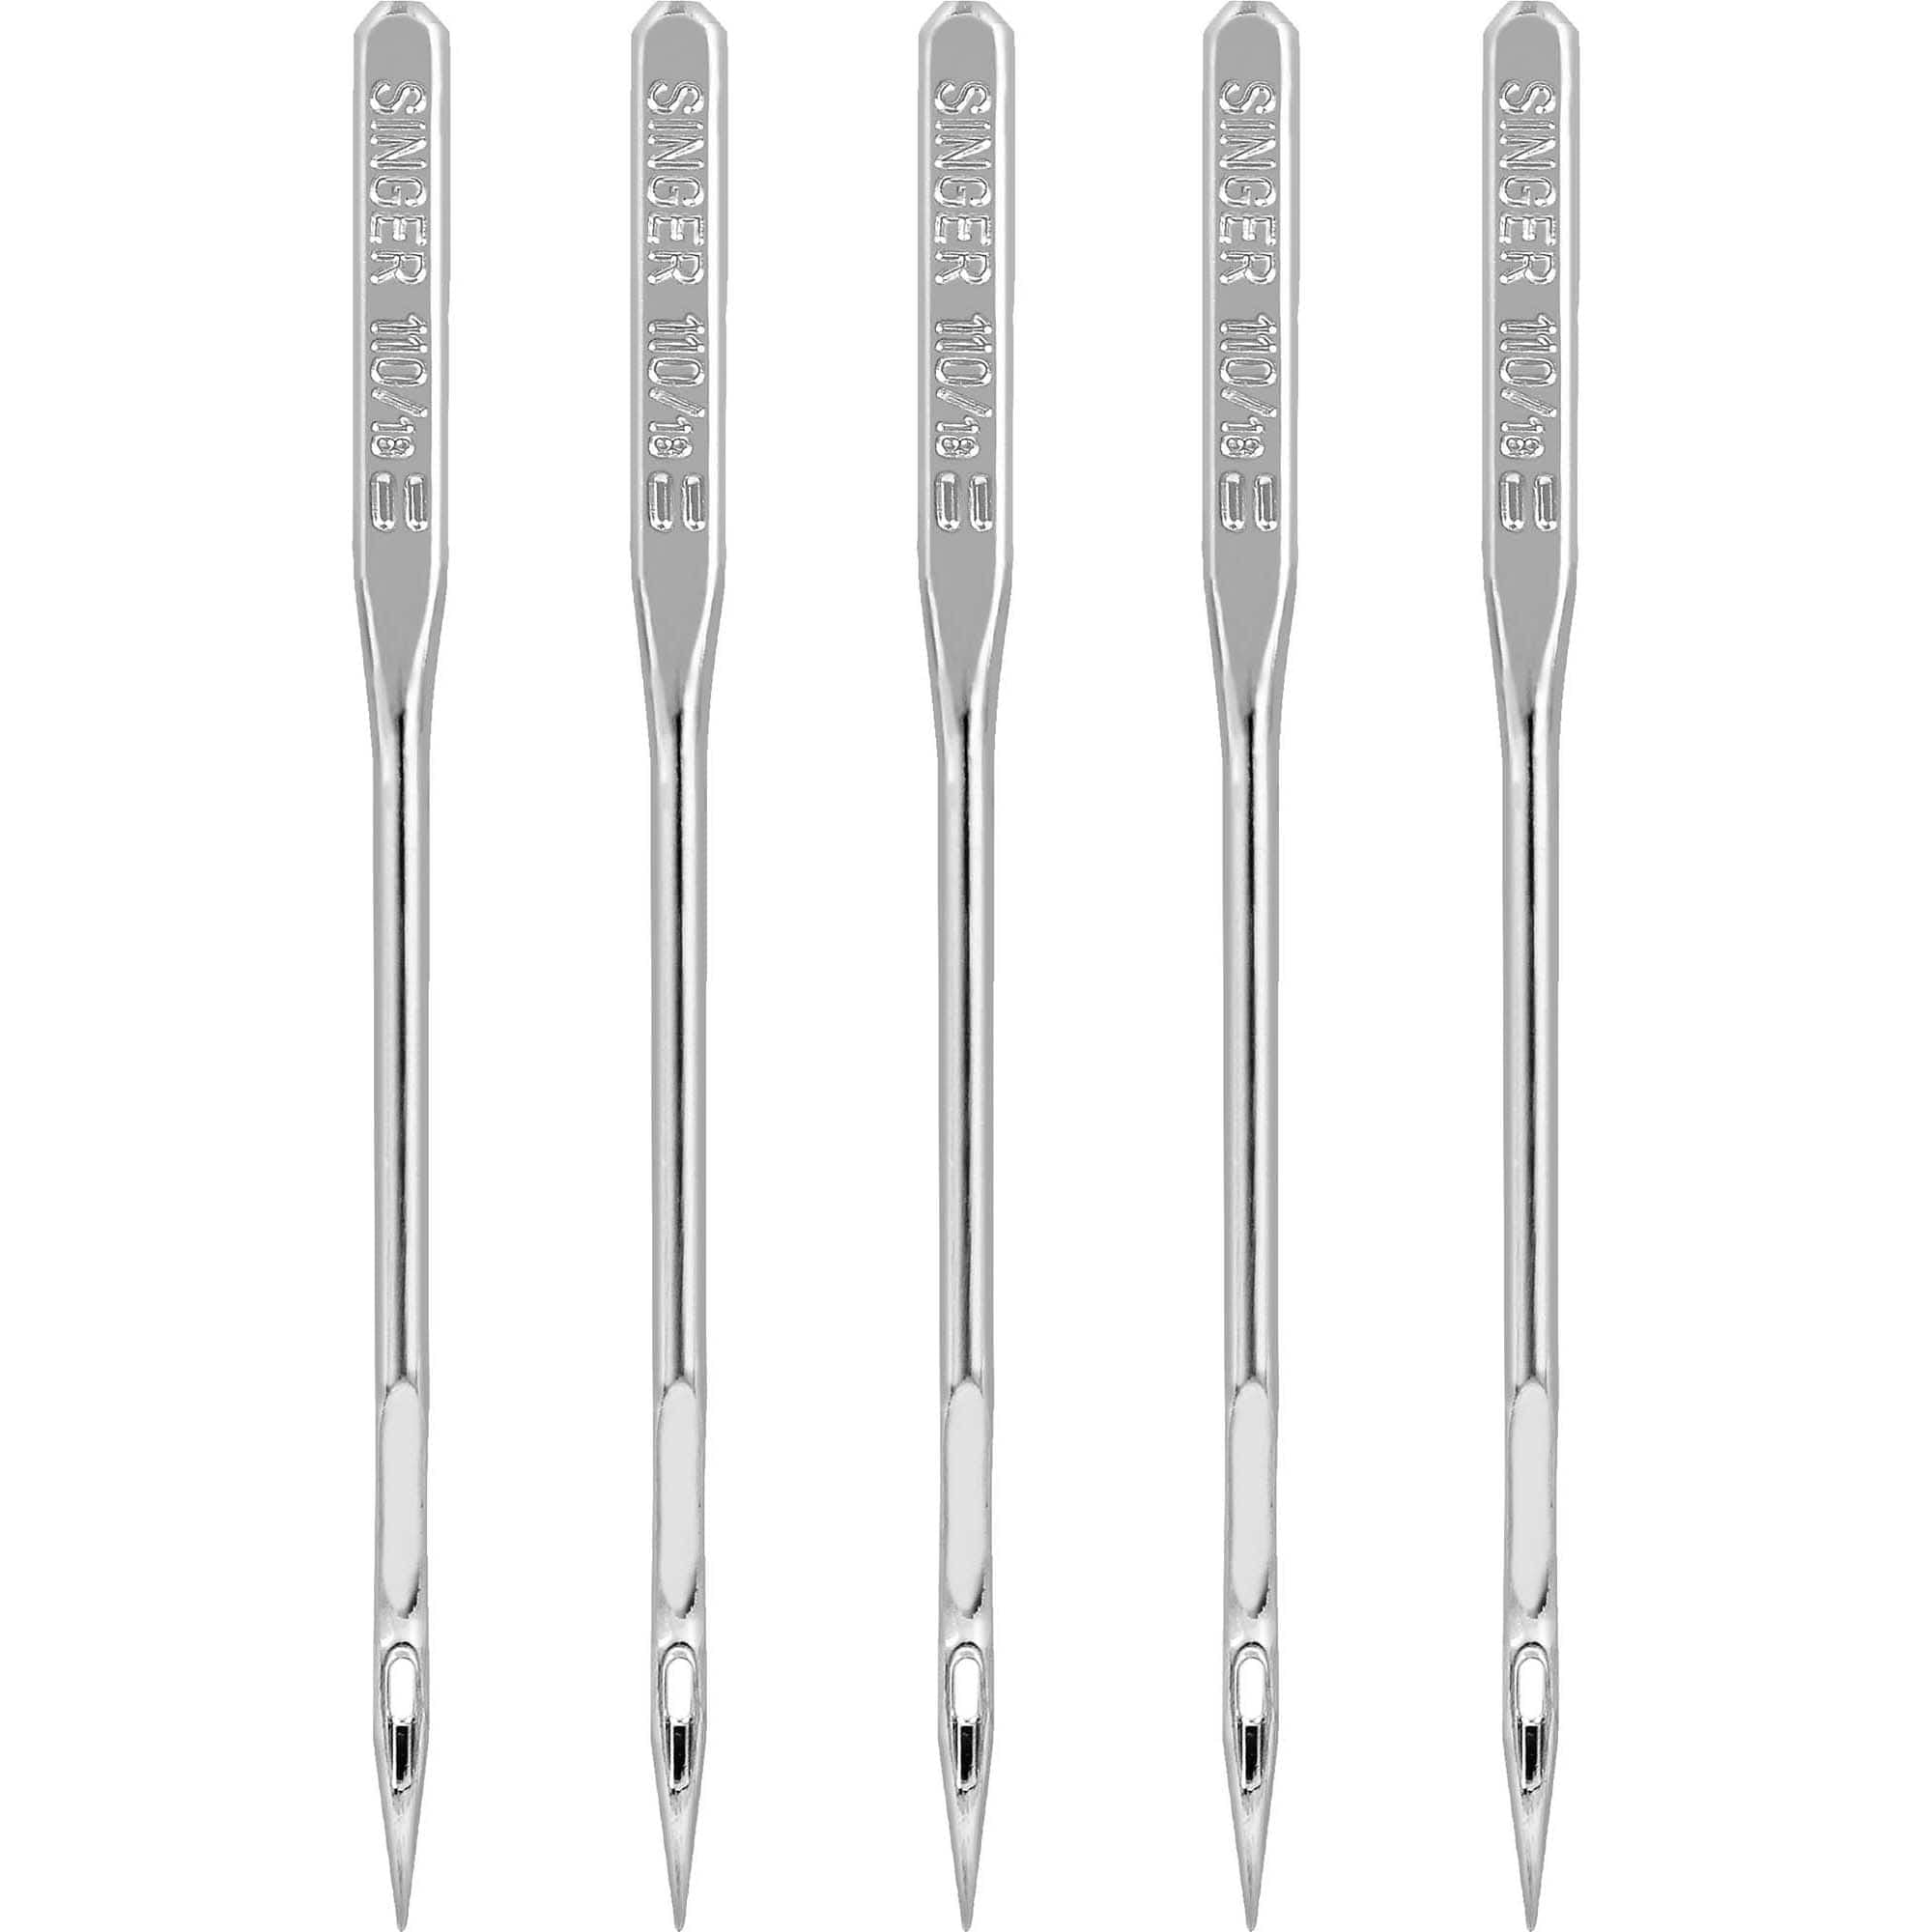 12x1 Substitute Needles 10 to Fit Singer Model 12 & Most Transverse Shuttle  Machines Using 12x1 Needles New Modern Made, Round Shank 